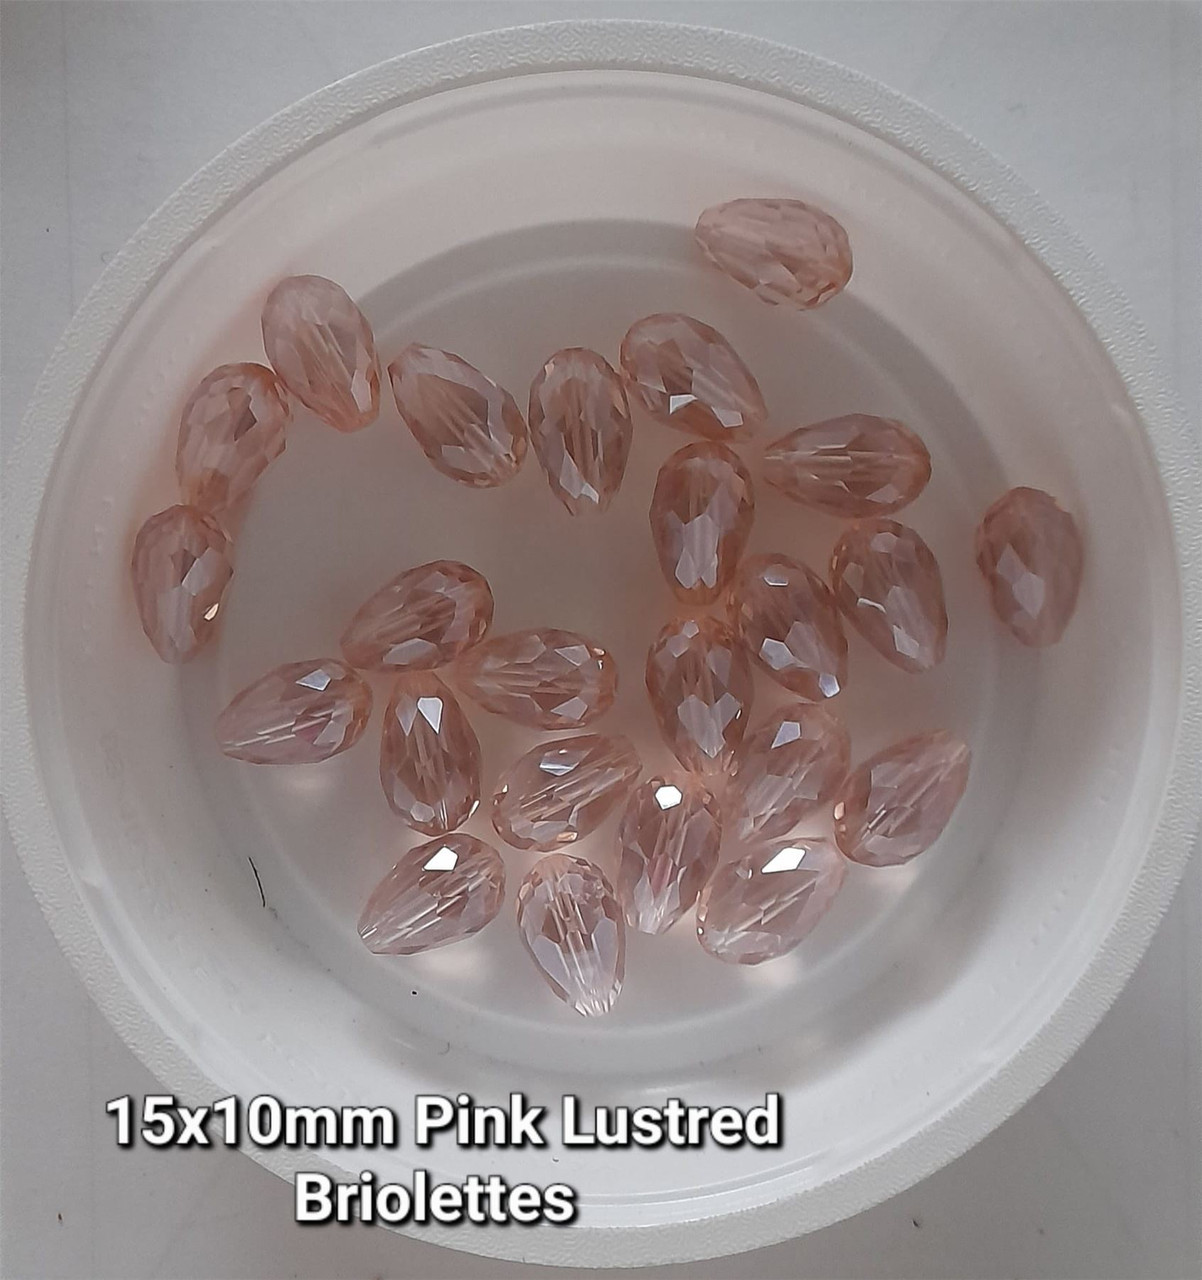 15mm x 10mm glass faceted tear drop beads (briolettes) pack of 24 beads - PINK LUSTERED